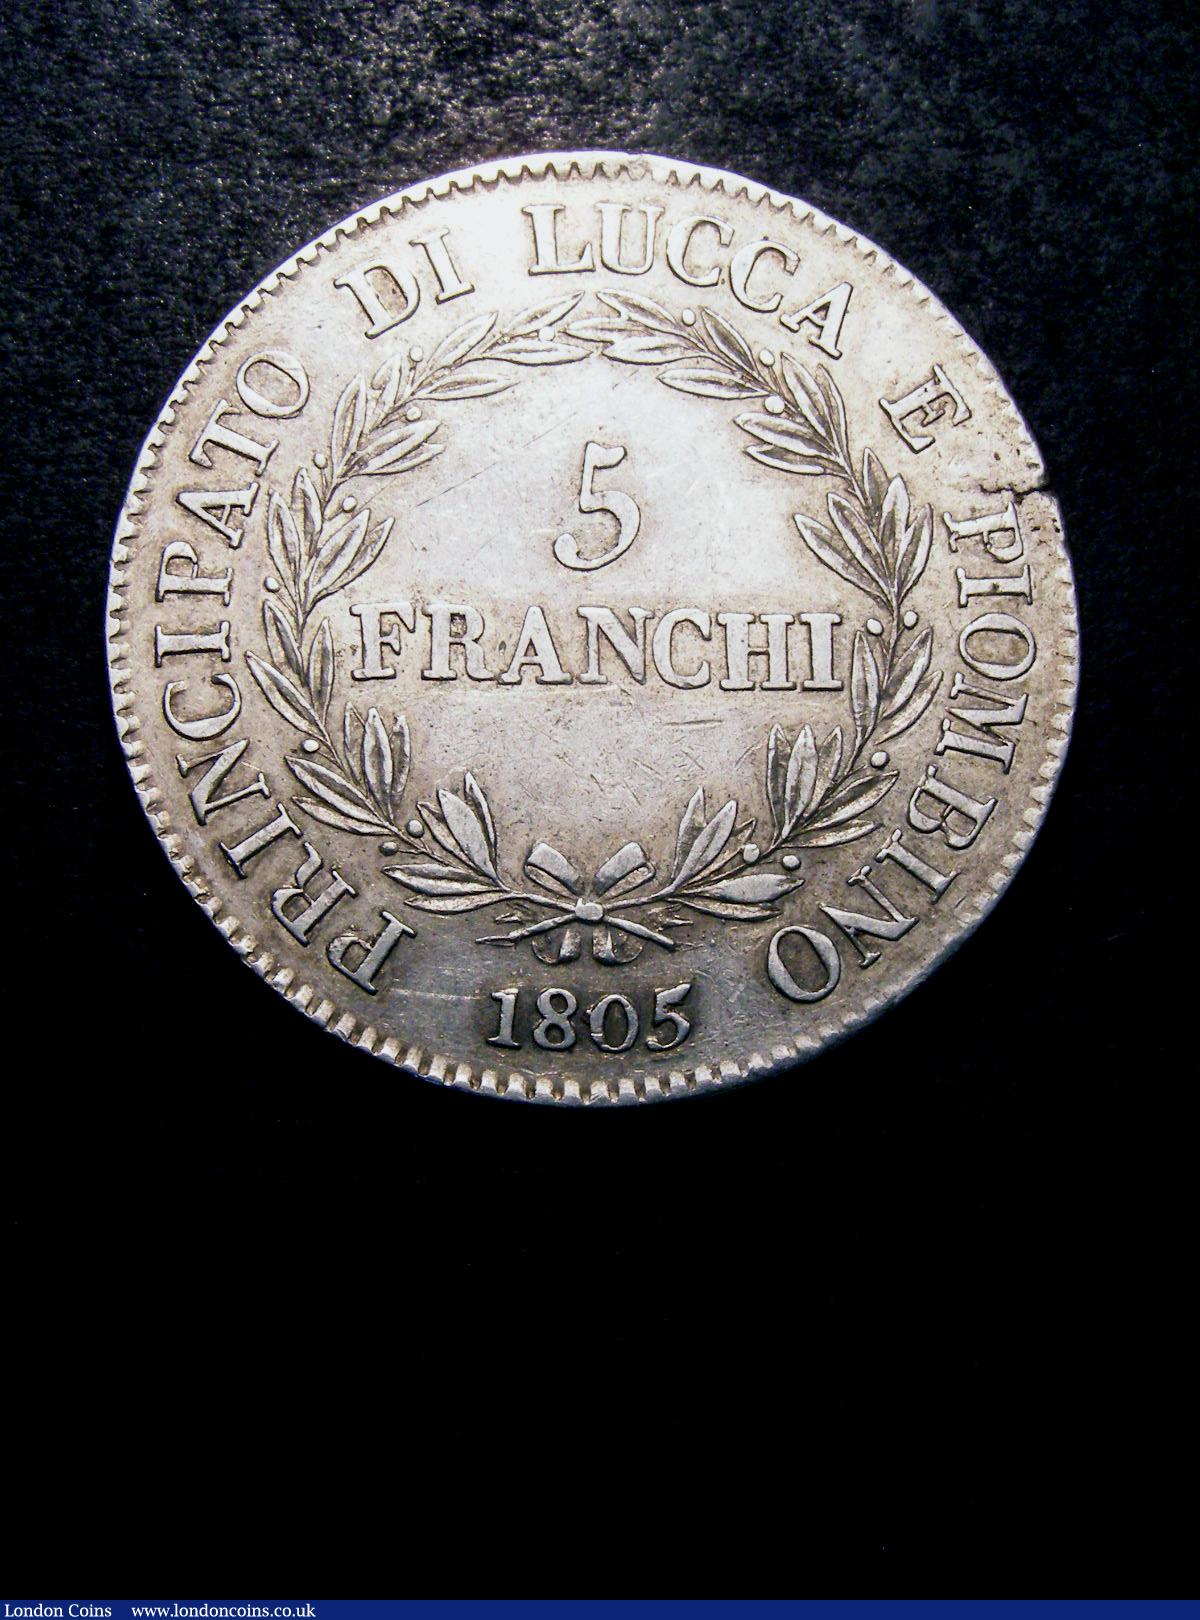 Italian States - Lucca 5 Franchi 1805 KM#24.1 VF with a flan crack at 3 o'clock on the obverse : World Coins : Auction 133 : Lot 1394